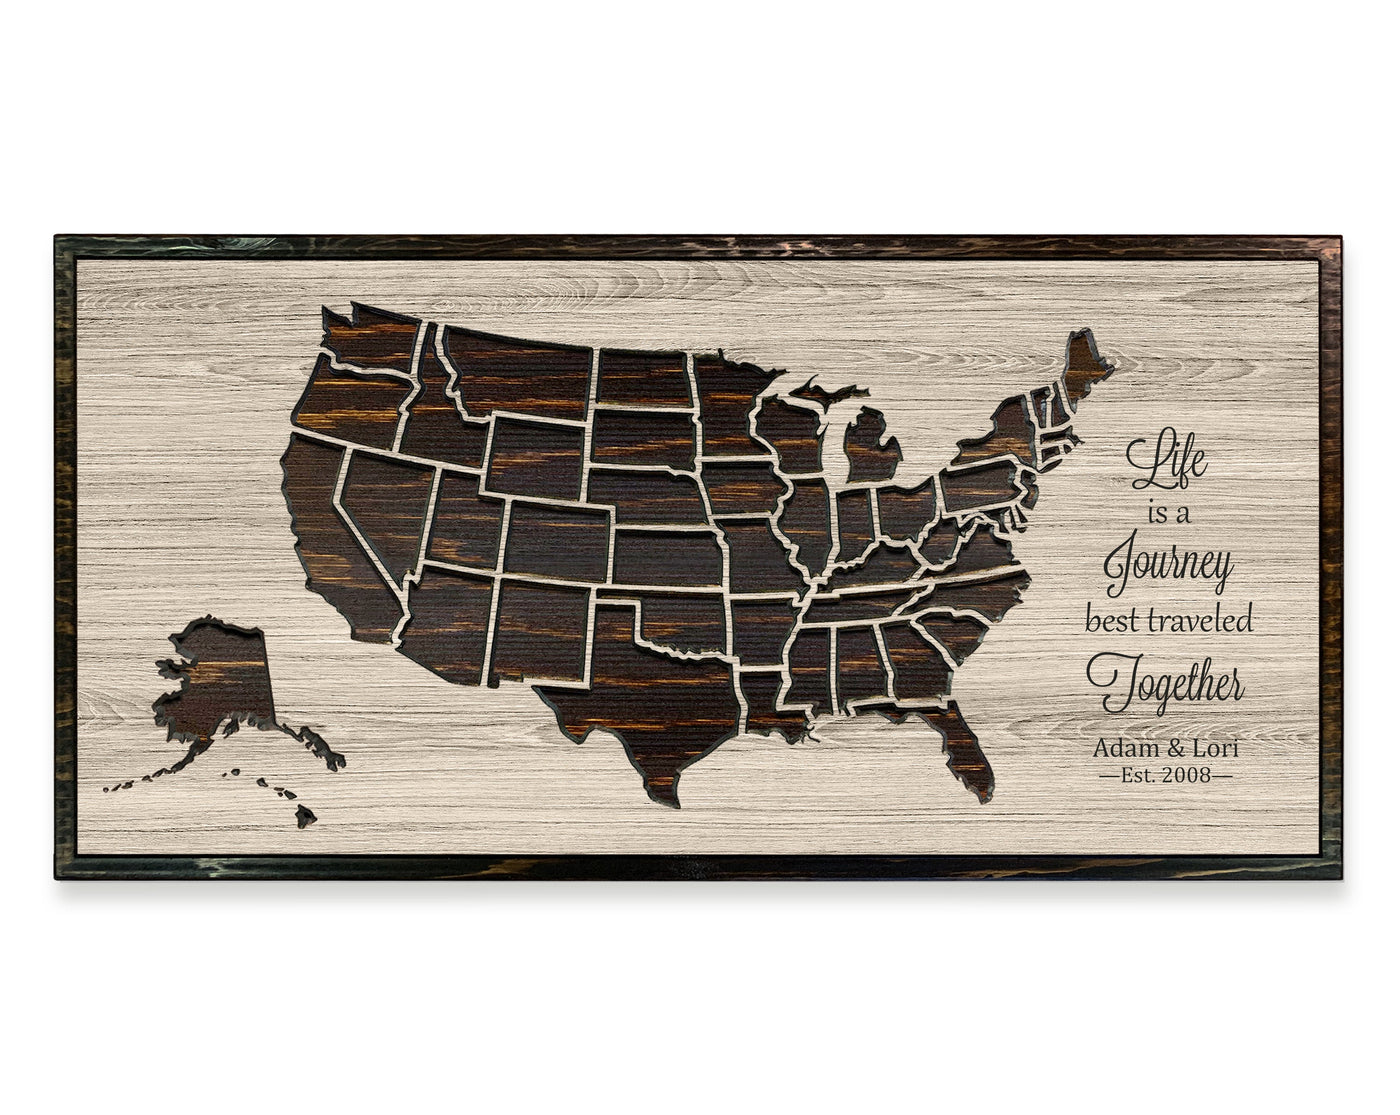 custom wooden push pin map - us map wood wall art that can be customized with your own text and mark locations with our unique push pins - excellent wedding anniversary gift idea